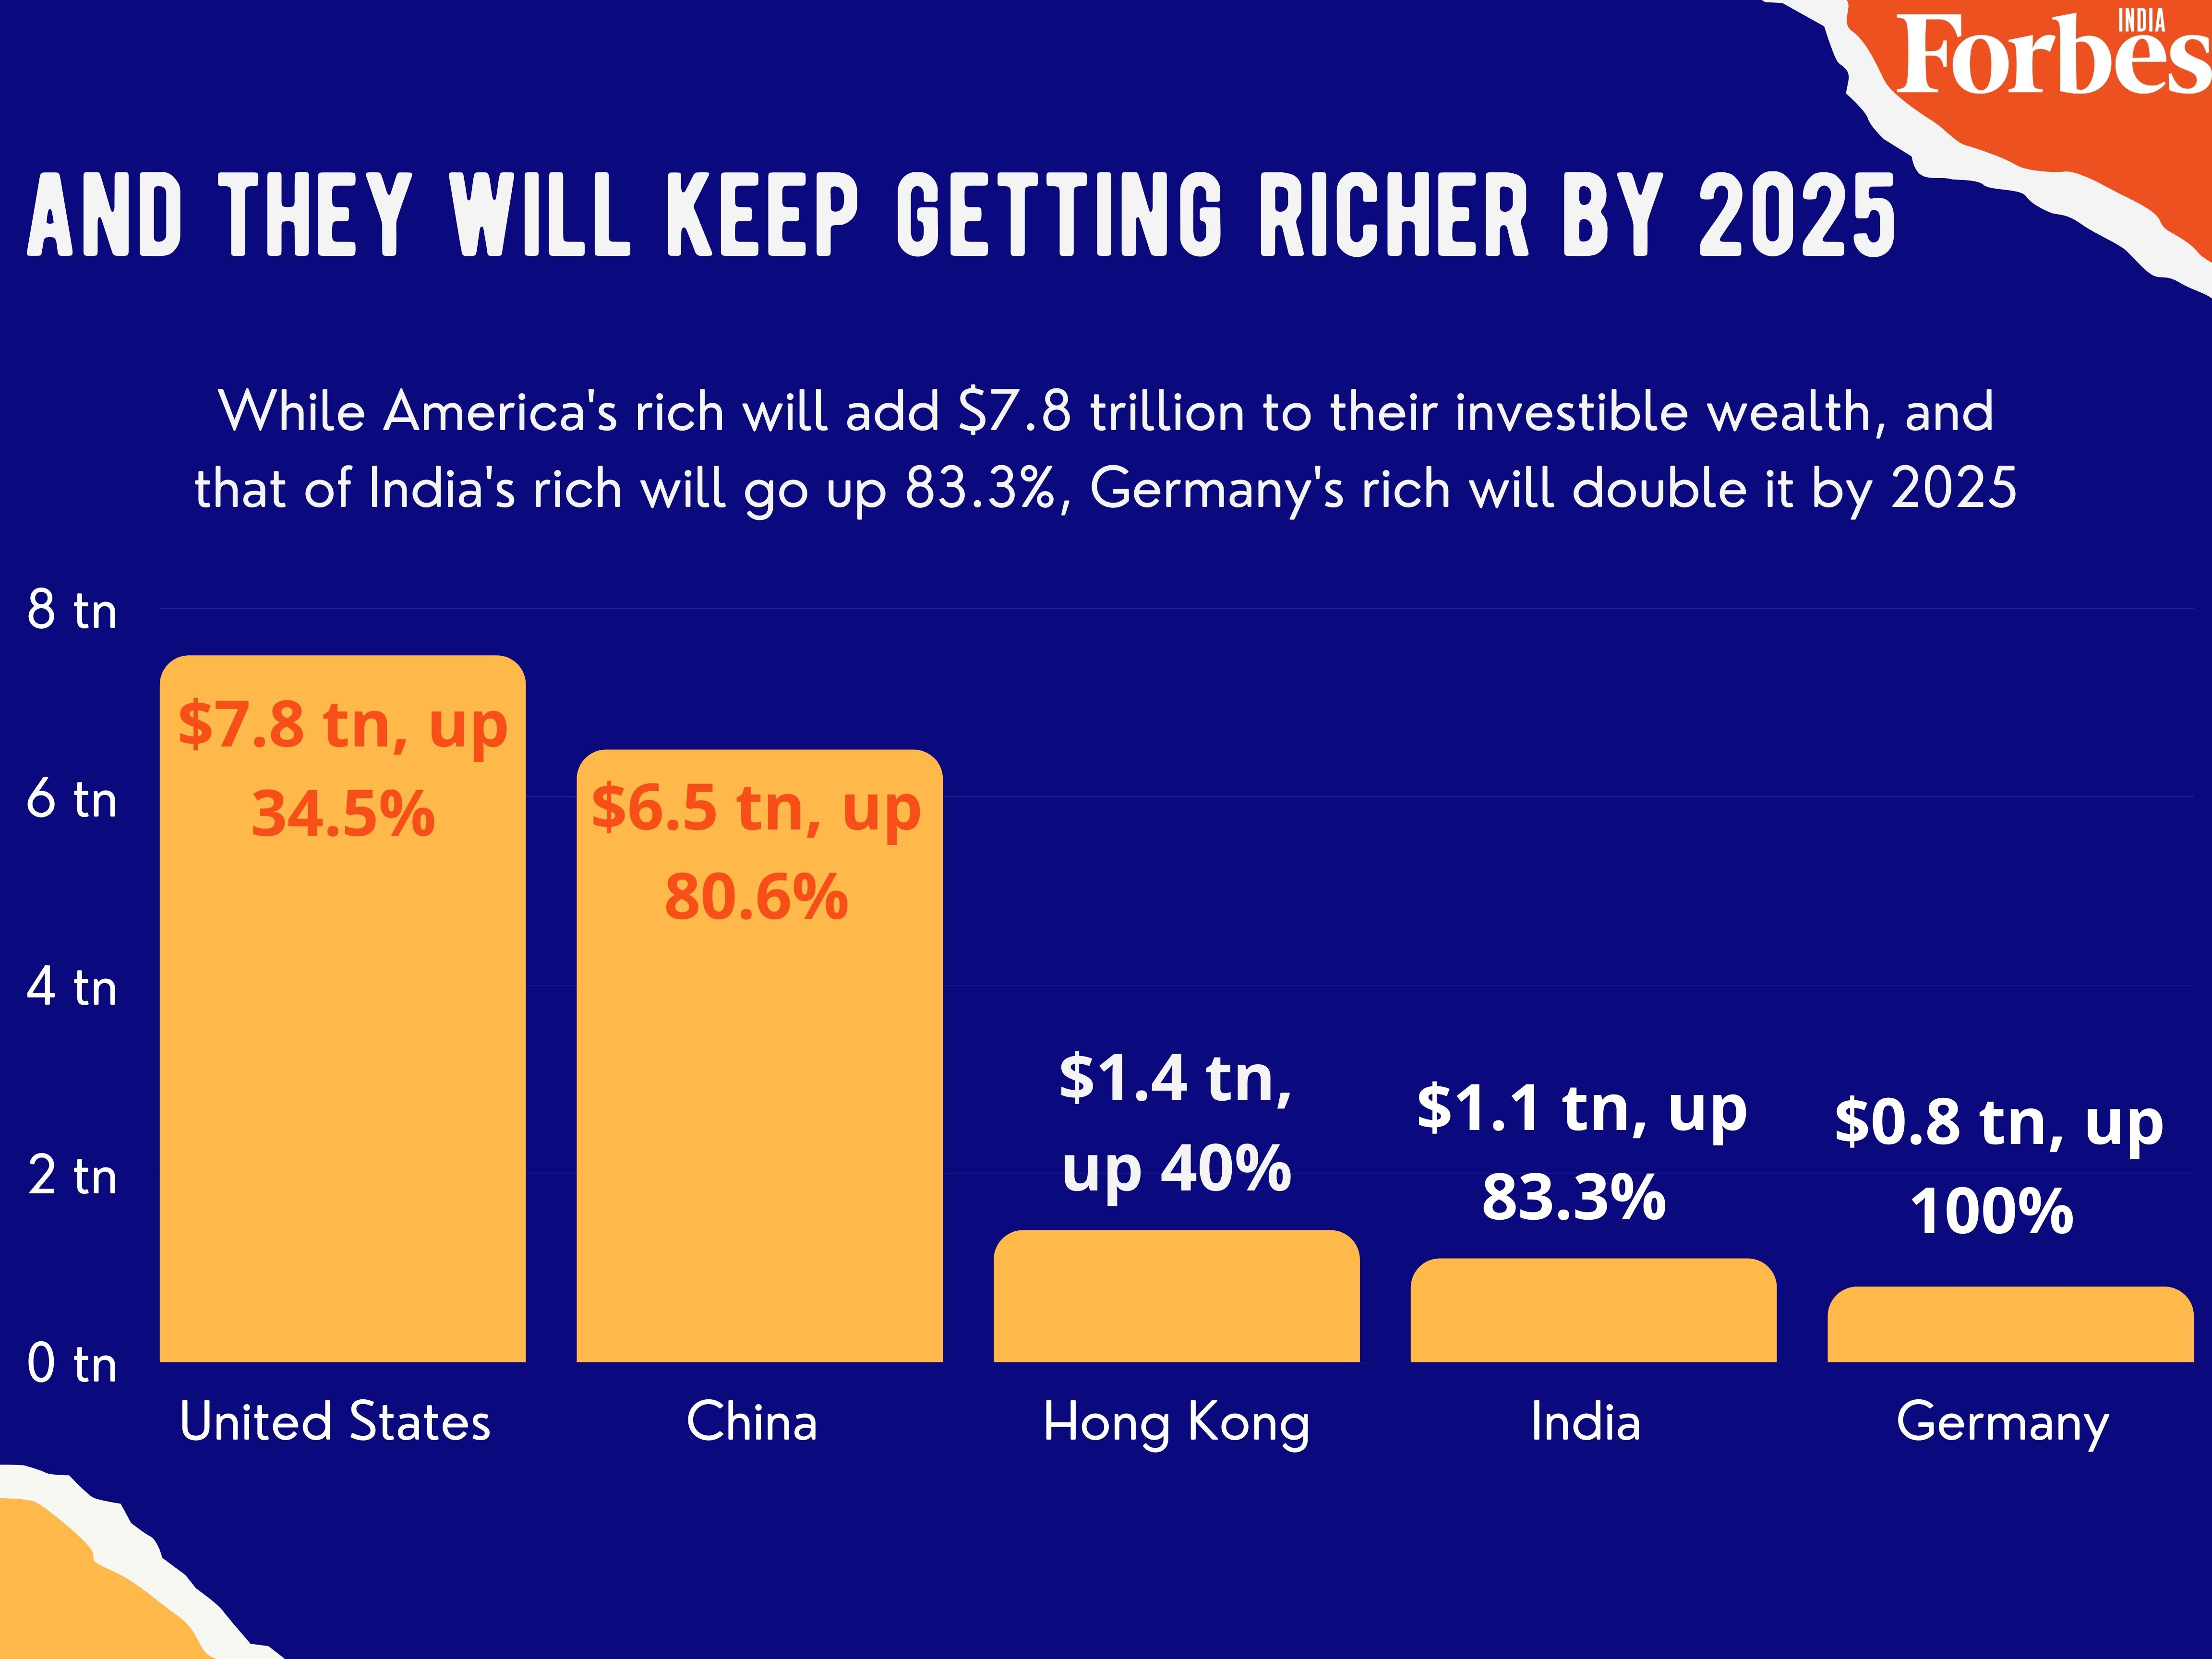 Here's how much the ultra-rich will get richer by 2025